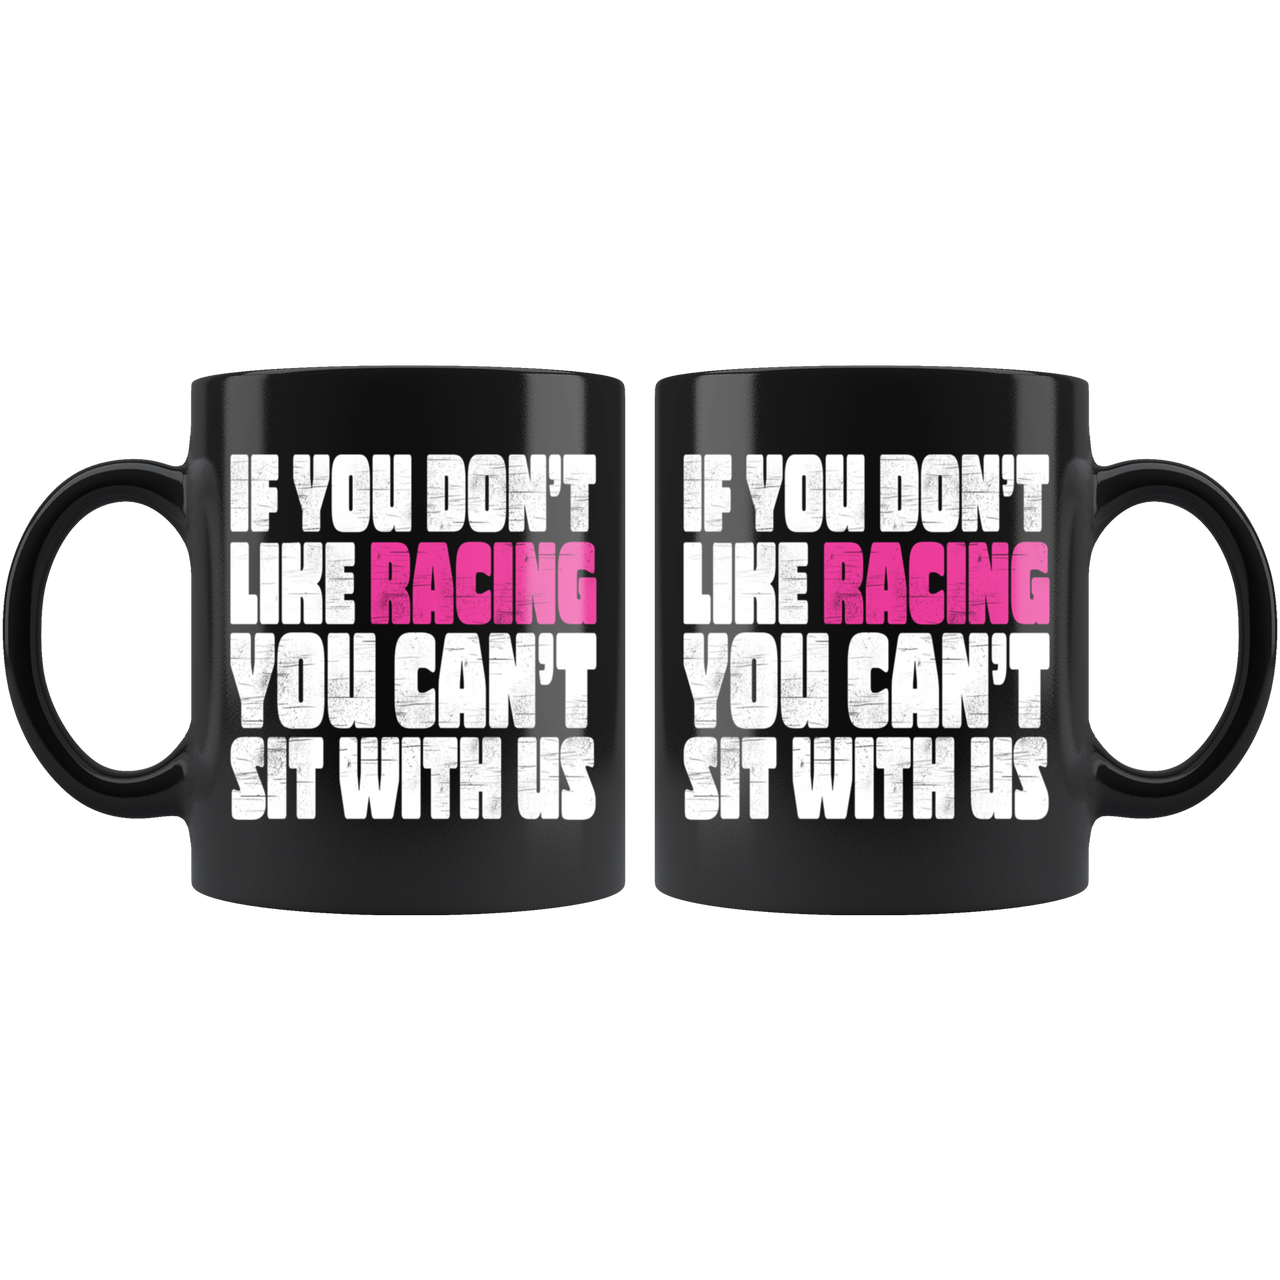 If You Don't Like Racing Don't Sit With Us Mug!